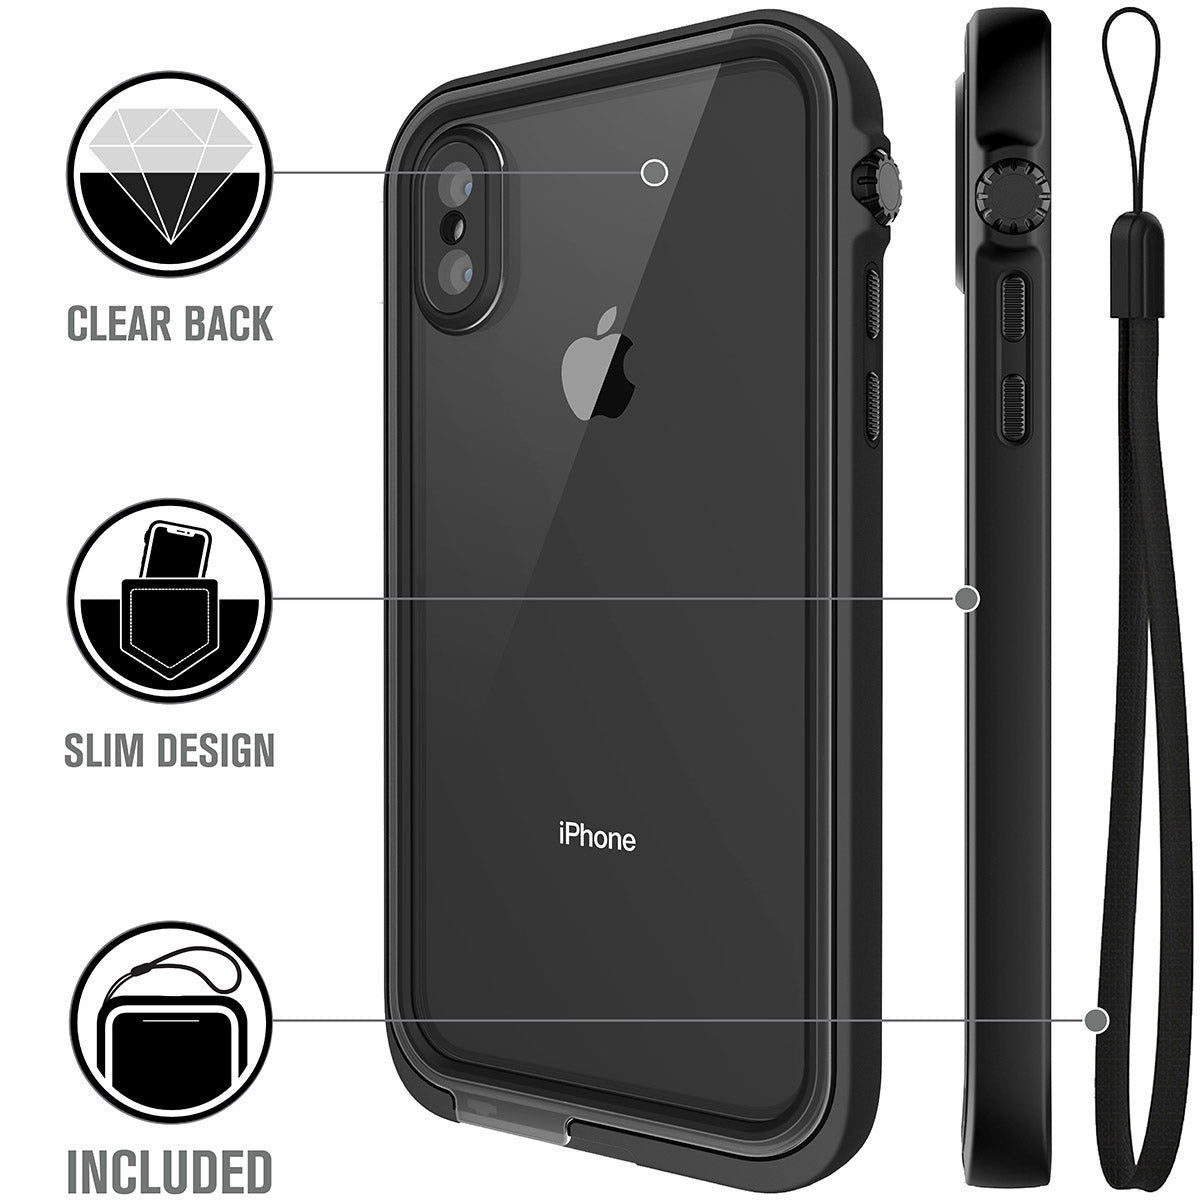 Catalyst iphone x/xr/xs/xs max waterproof case x showing the case features with lanyard in stealth black text reads clear back slim design included 